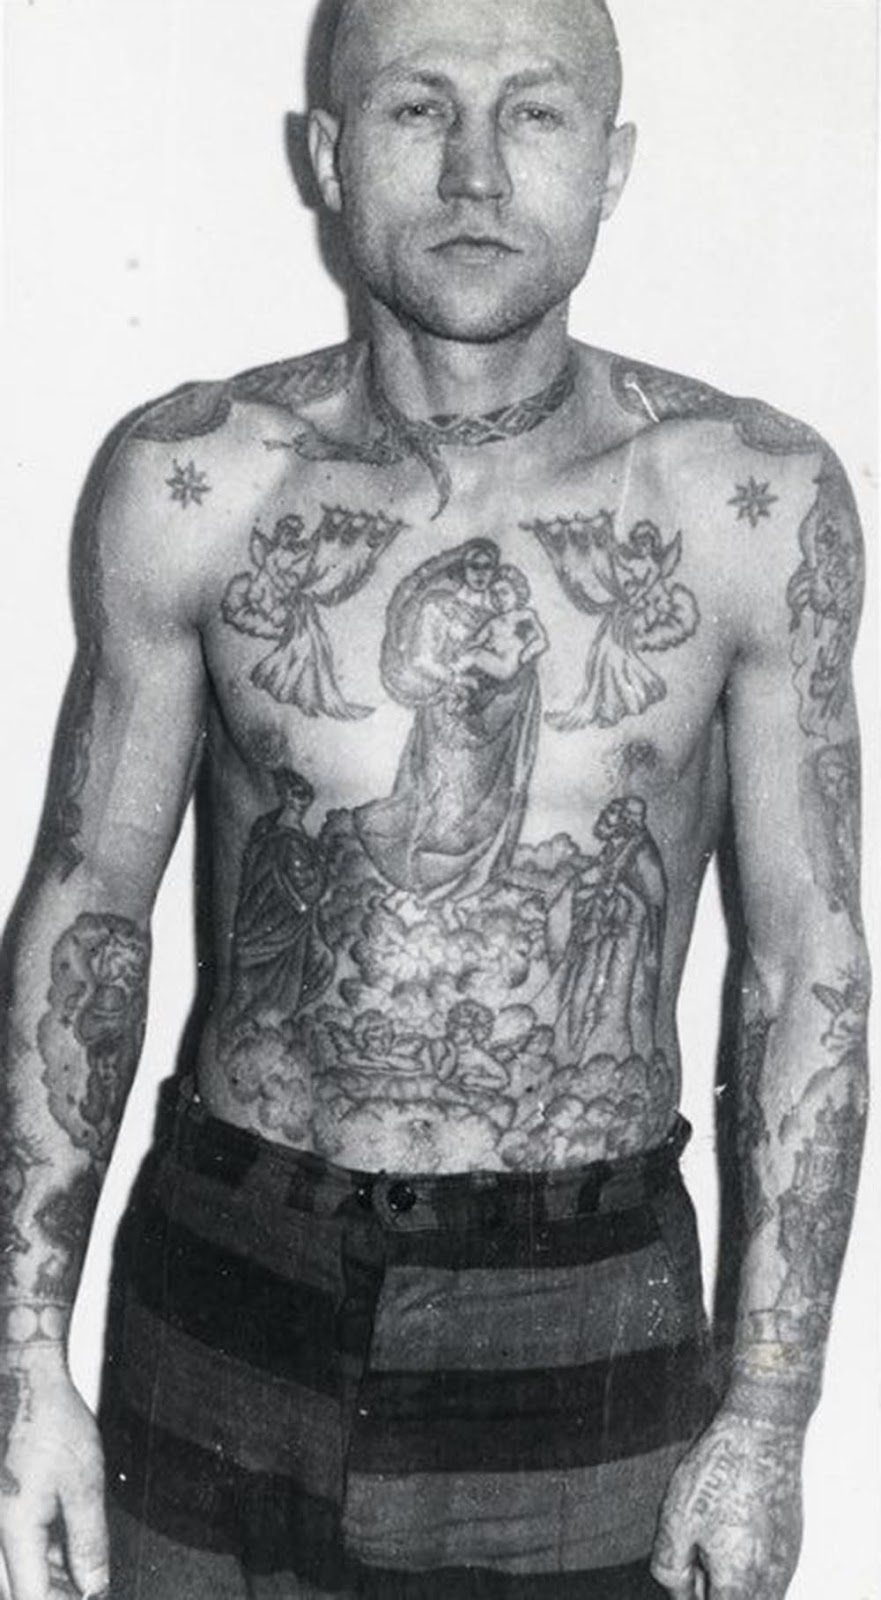 A snake around the neck is a sign of drug addiction. The stars on the clavicles and epaulettes on the shoulders show that this inmate is a criminal authority. The Madonna and child is one of the most popular tattoos worn by criminals — there can be a number of meanings. It can symbolise loyalty to a criminal clan; it can mean the wearer believes the Mother of God will ward off evil; or it can indicate the wearer has been behind bars from an early age.